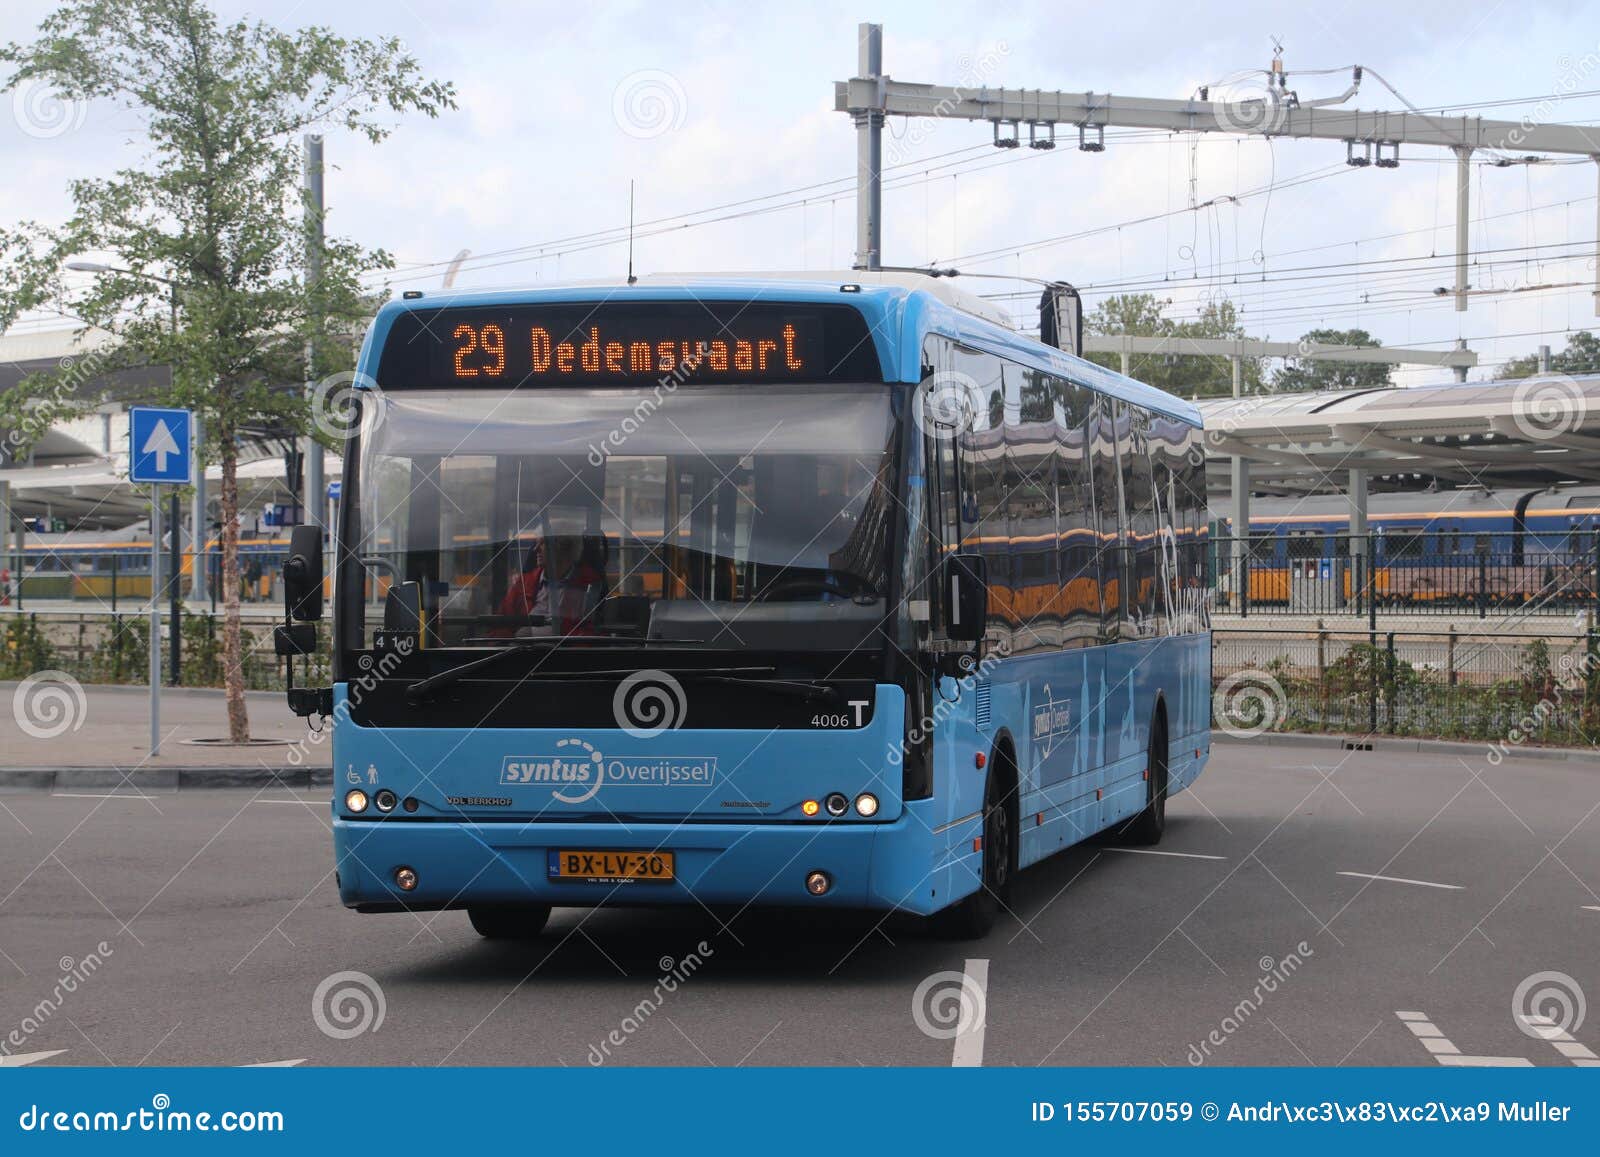 https://thumbs.dreamstime.com/z/august-zwolle-netherlands-public-transportation-around-station-area-local-bus-line-heading-to-dedemsvaart-zwolle-155707059.jpg